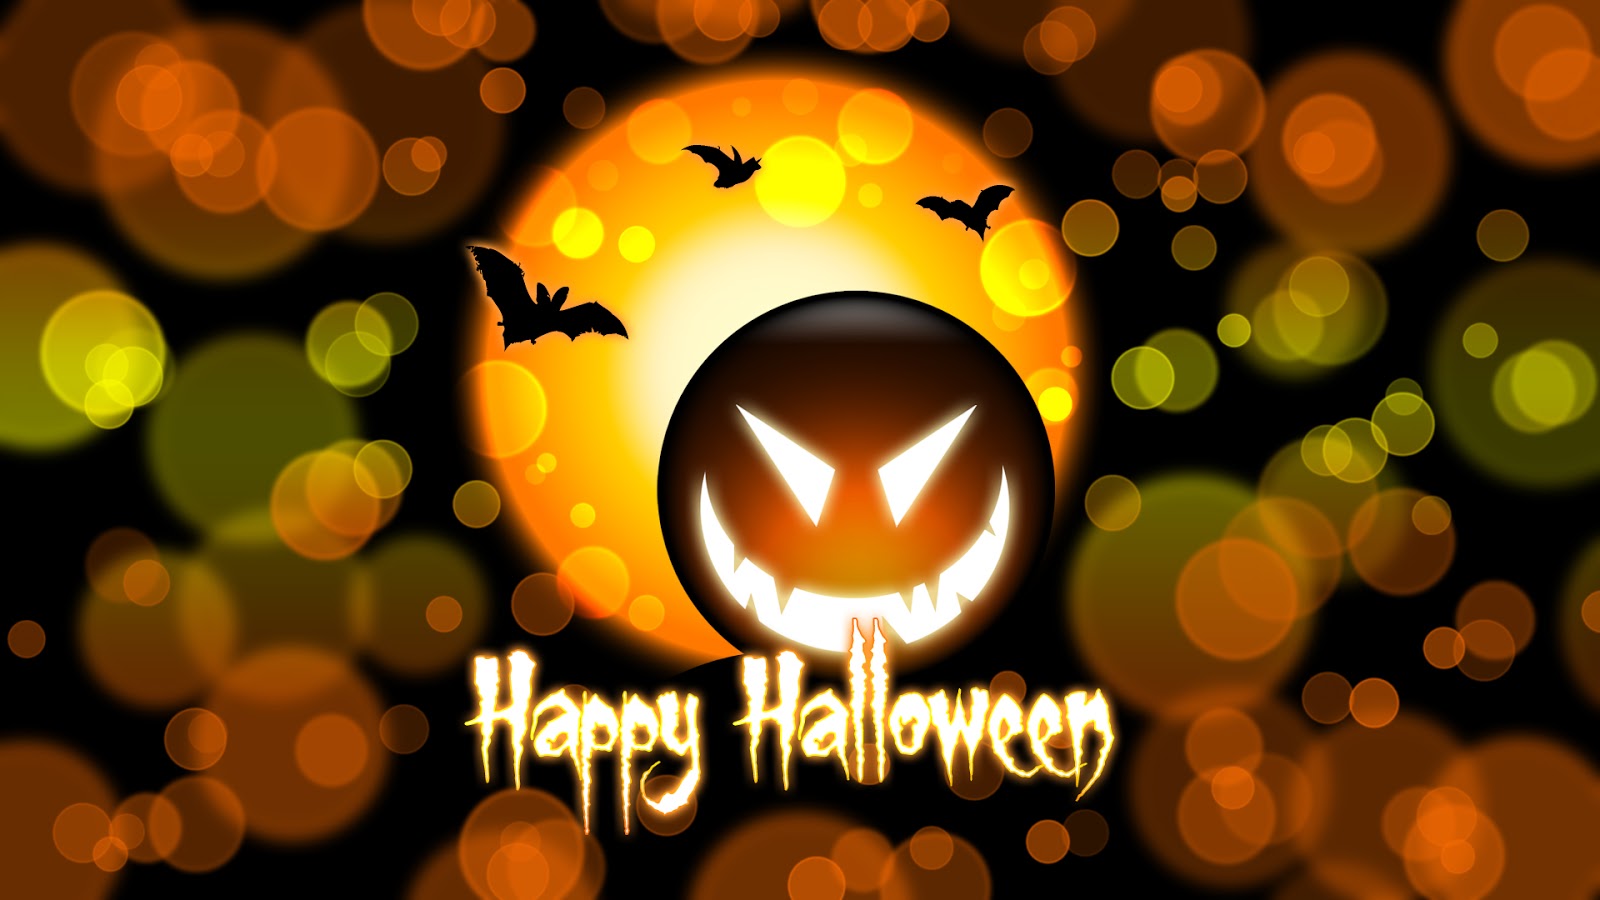 Happy Halloween Wishes Cards Animations Greetings Emotions